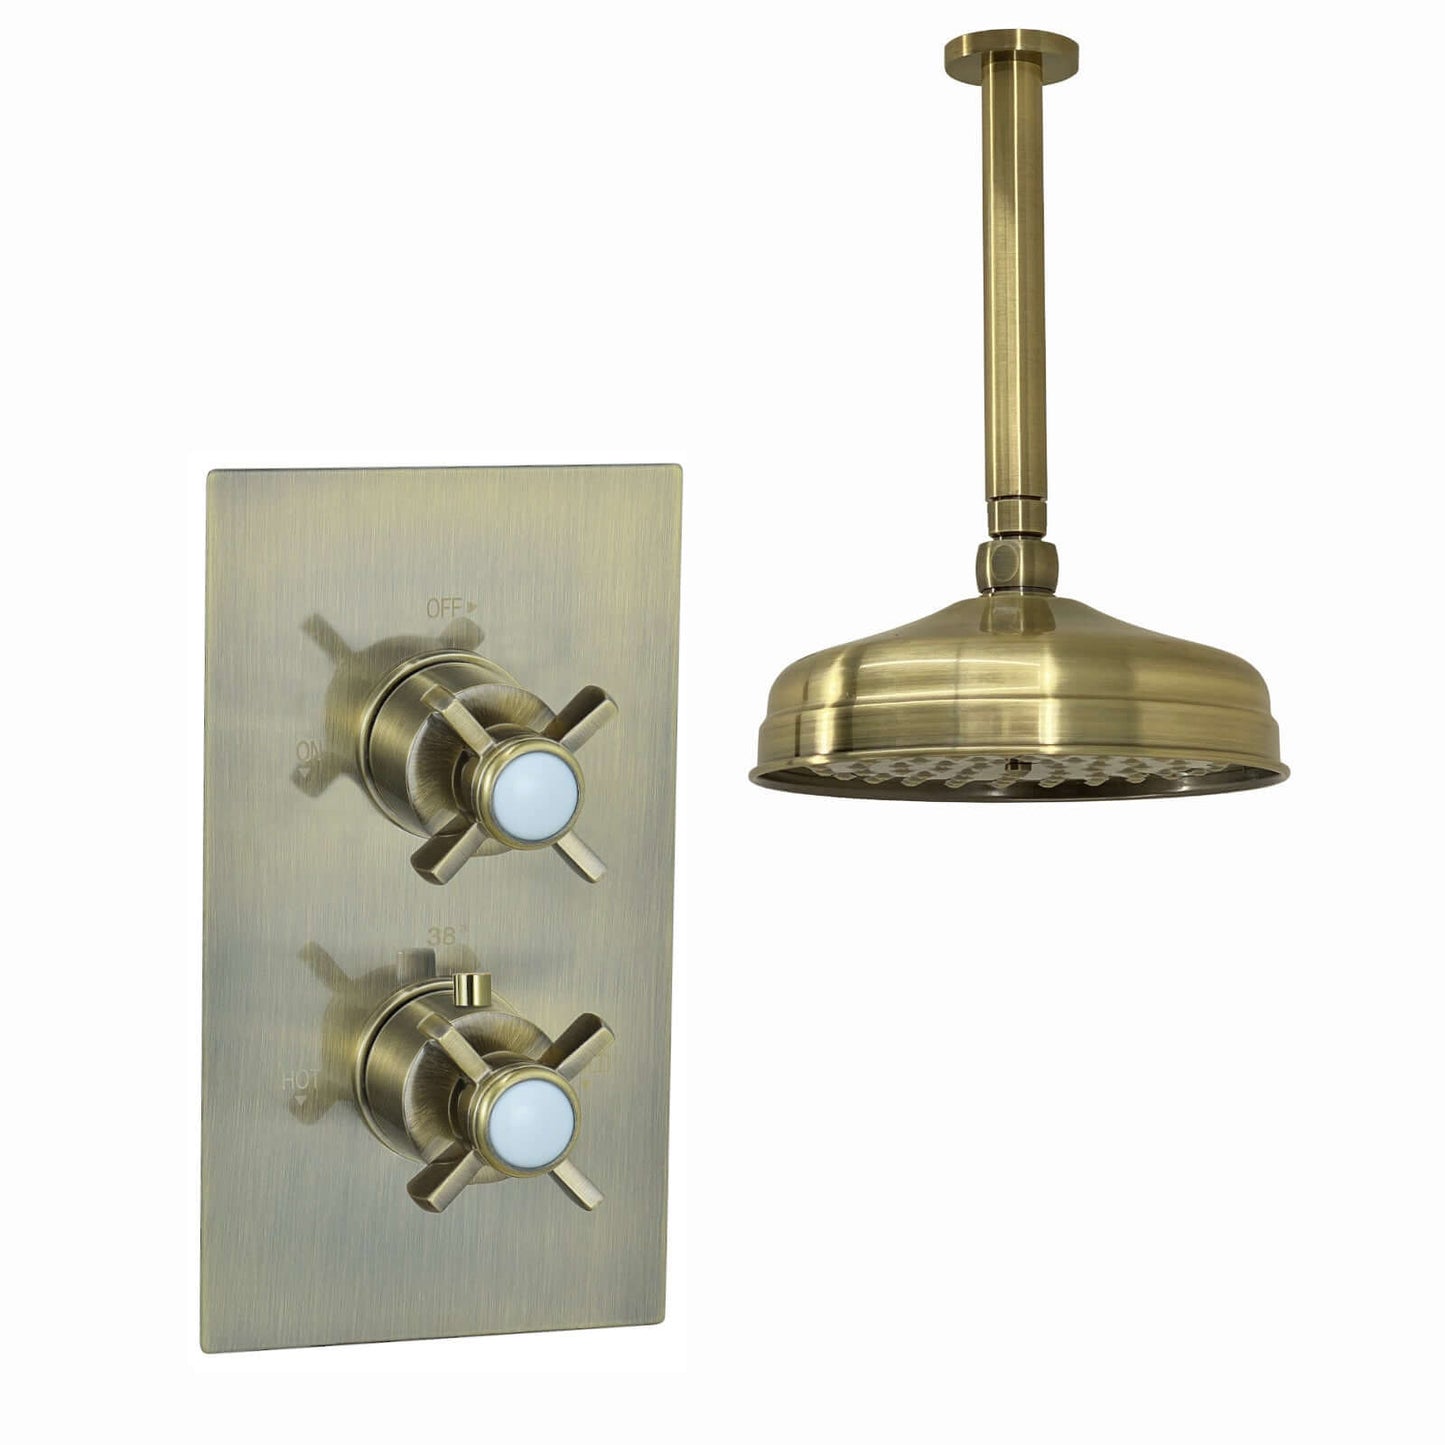 SH0263-01-edward-traditional-crosshead-and-white-details-concealed-thermostatic-shower-set-ceiling-fixed-8-shower-head-antique-bronze-1-outlet